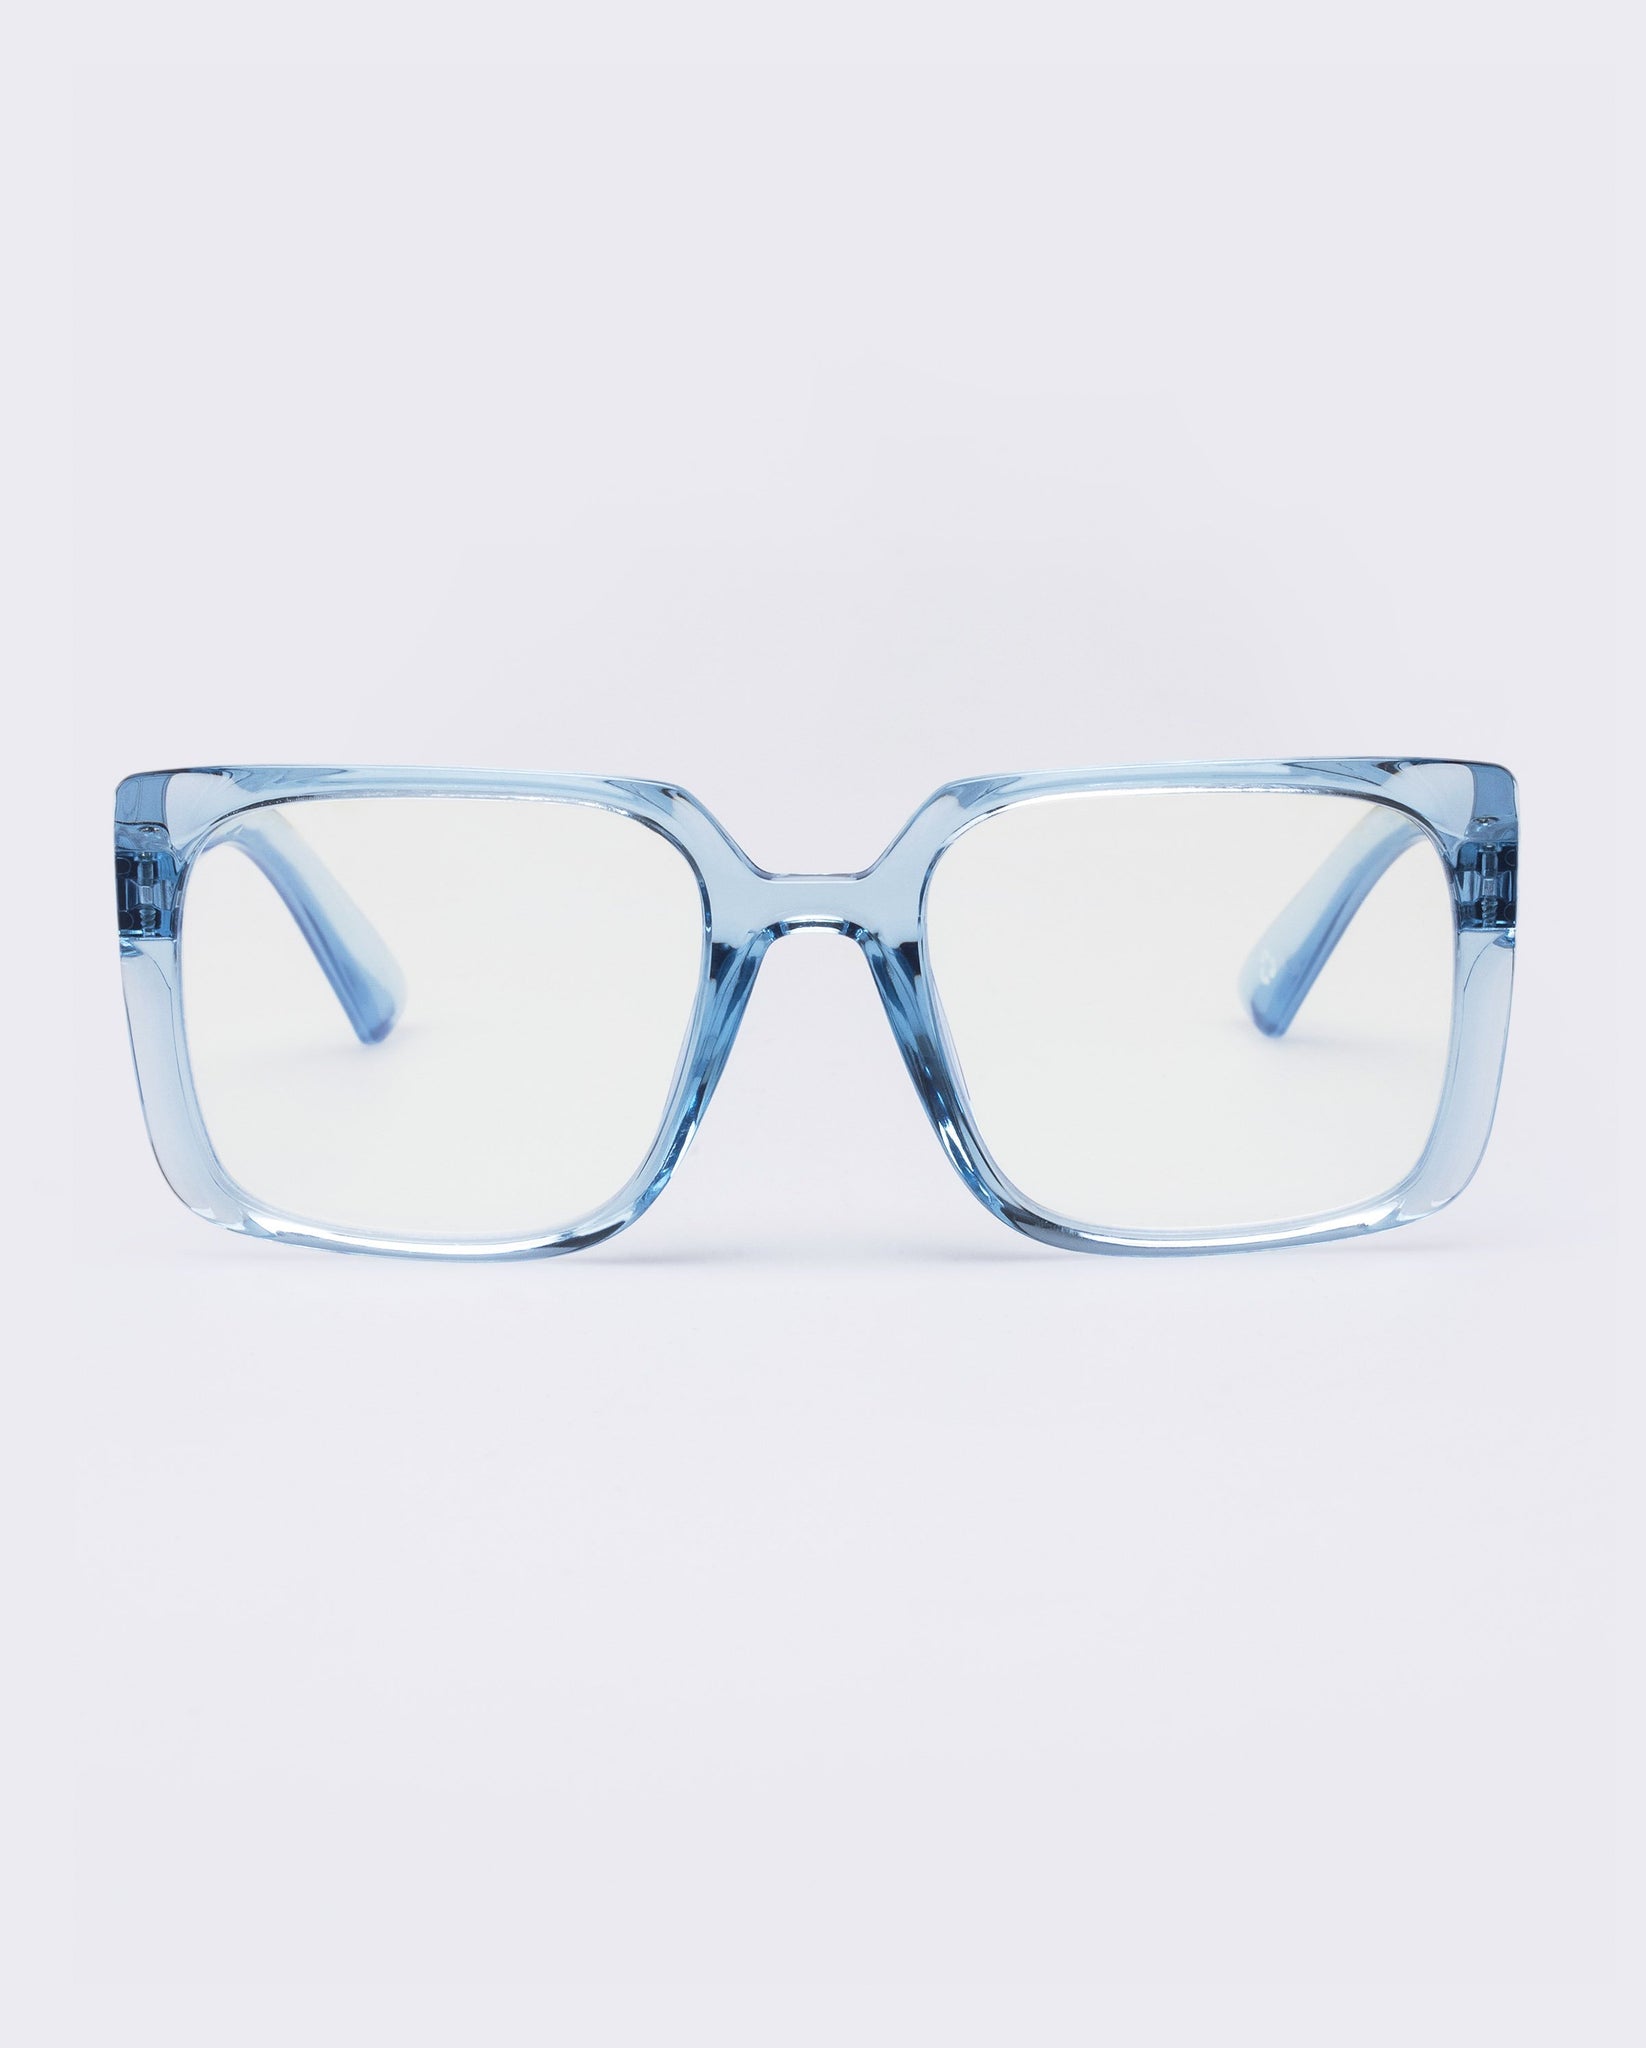 The Book Club 'Fairy Droppings' Blue Light Reading Glasses - Cerulean | PRESENCE Paris